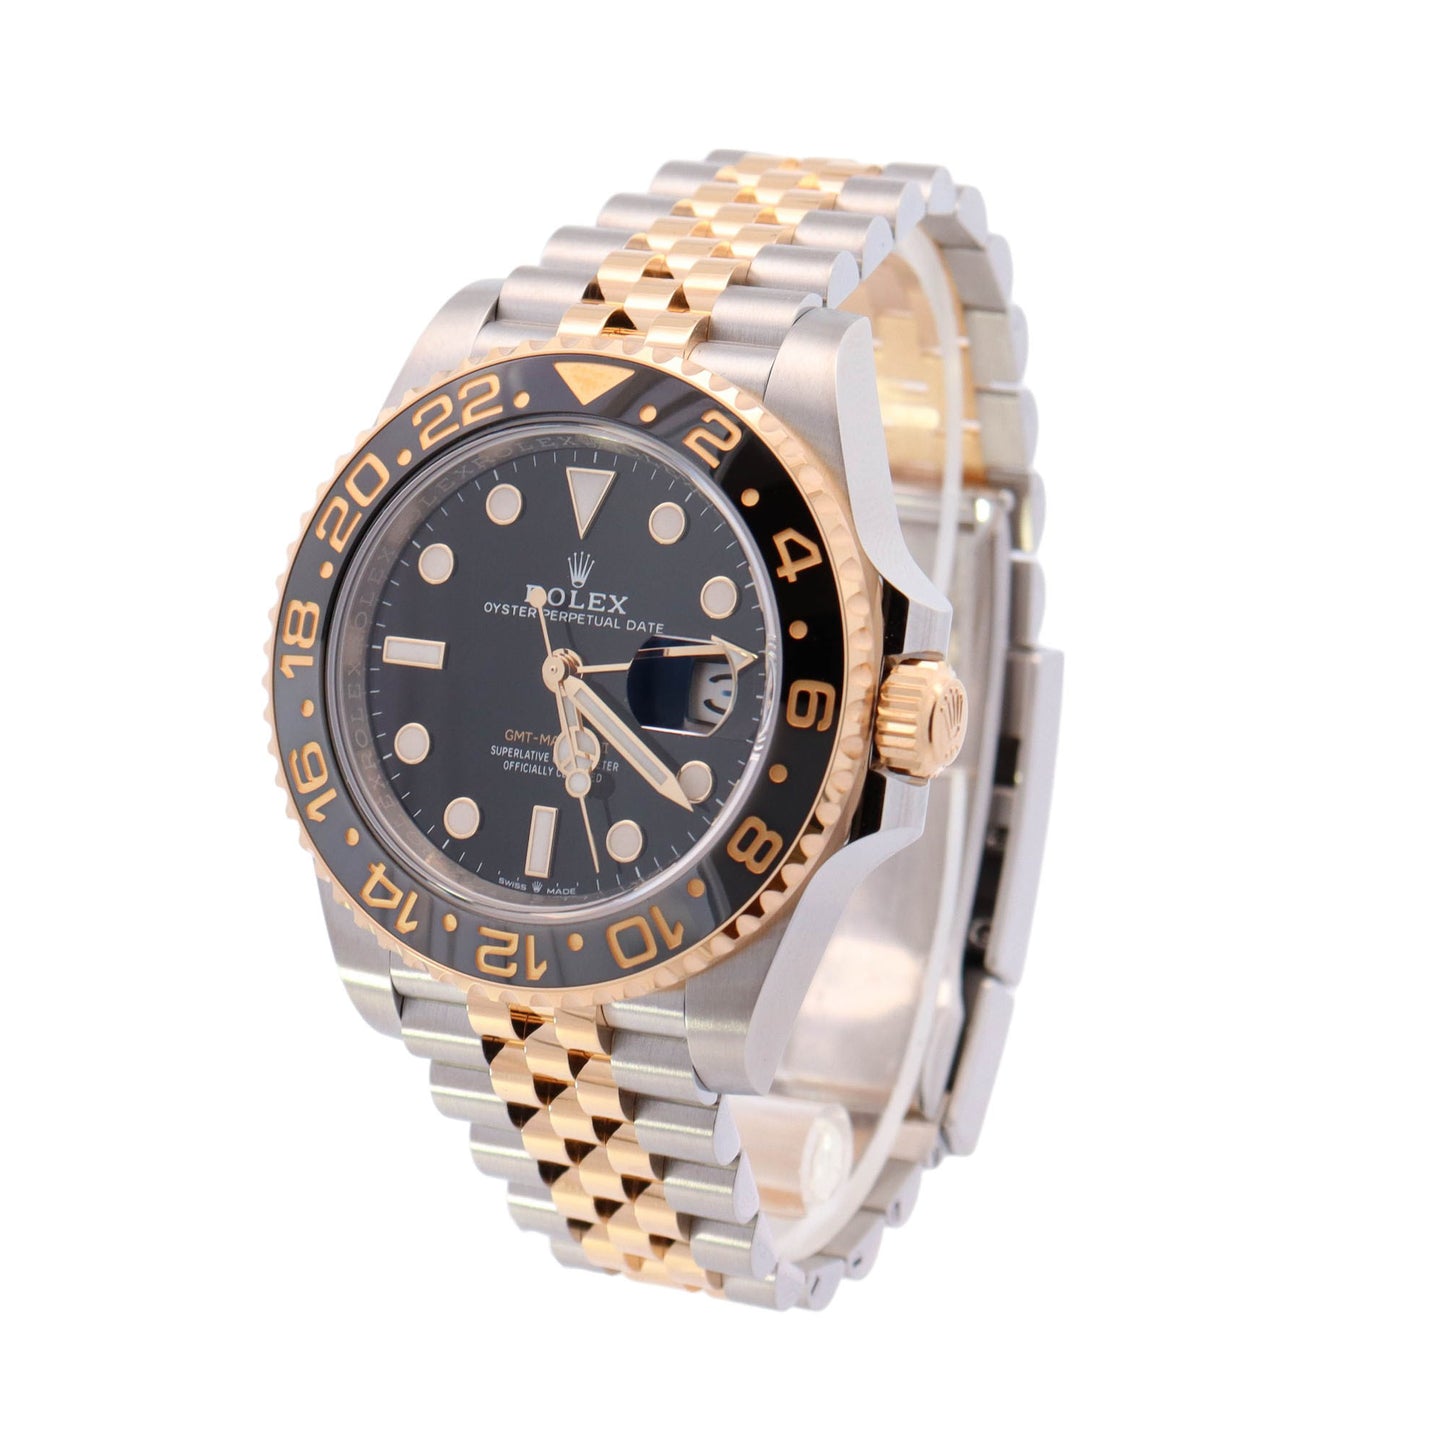 Rolex GMT Master II "Guinness" Two-Tone Stainless Steel & Yellow Gold 40mm Black Dot Dial Watch Reference #: 126713GRNR - Happy Jewelers Fine Jewelry Lifetime Warranty